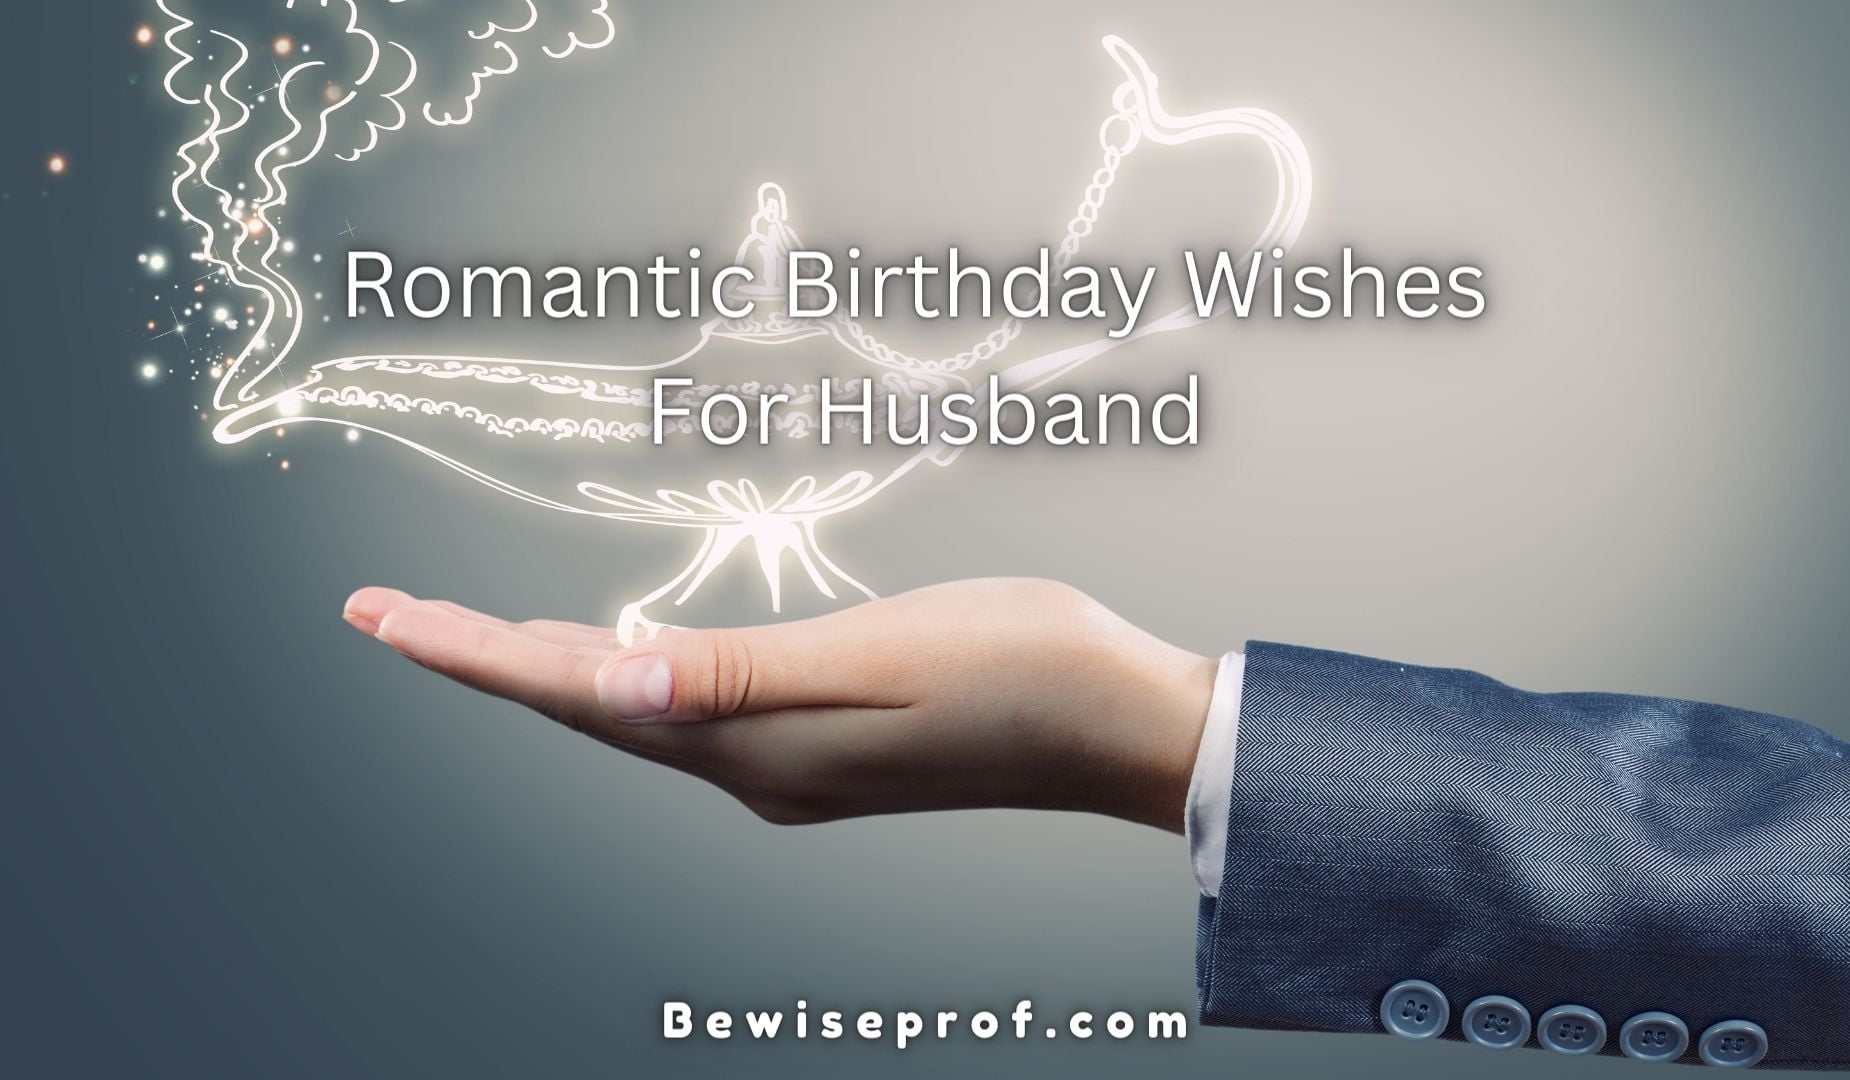 Romantic Birthday Wishes For Husband